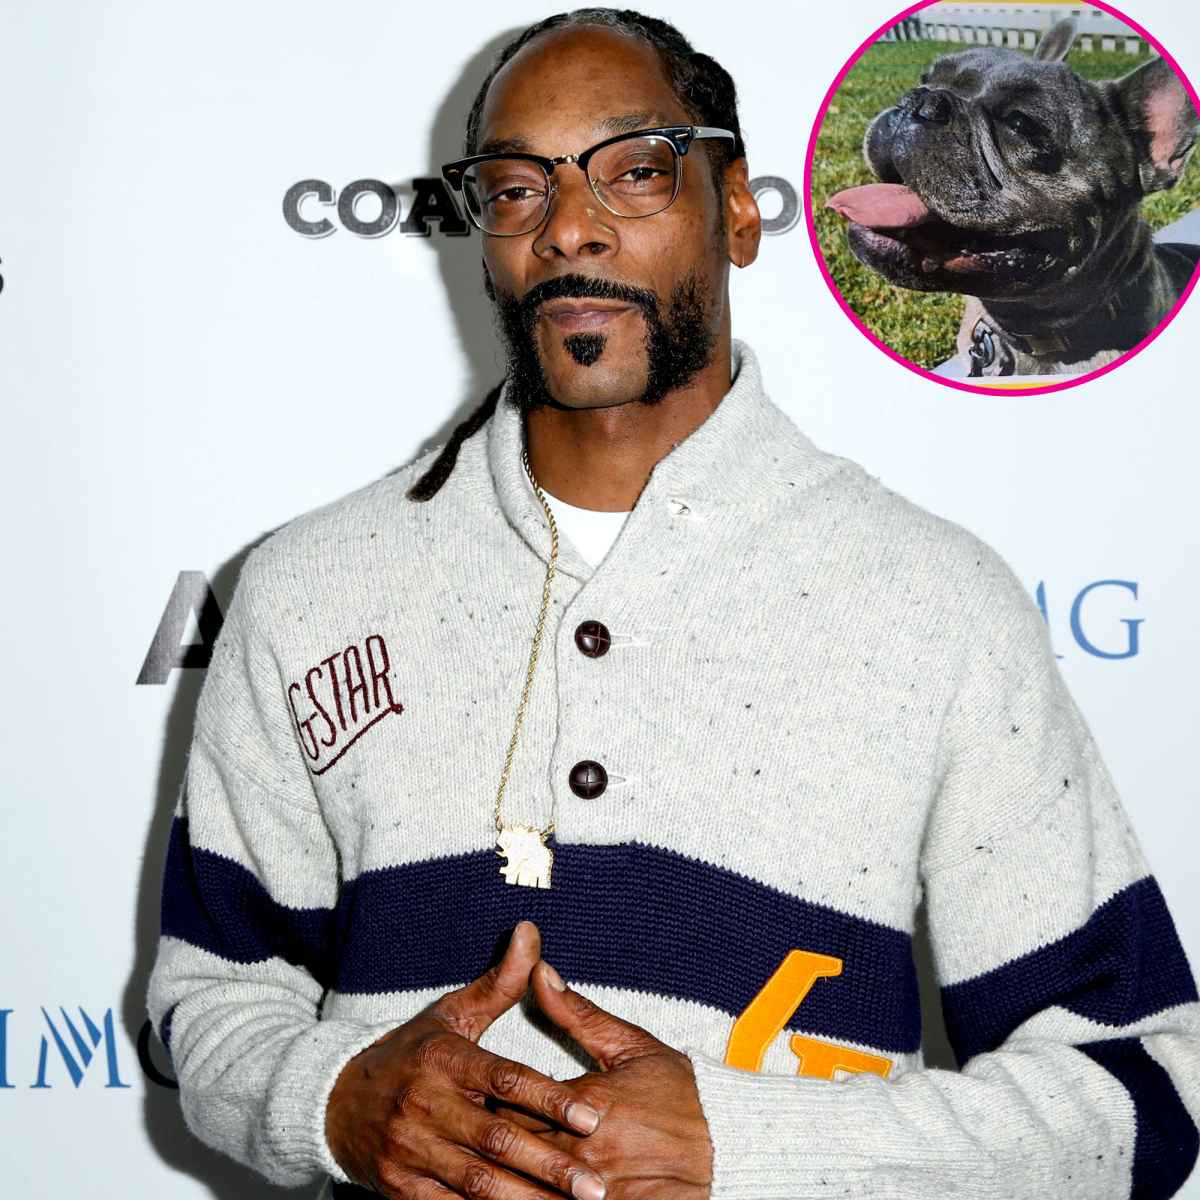 Snoop Dogg is getting his own biopic